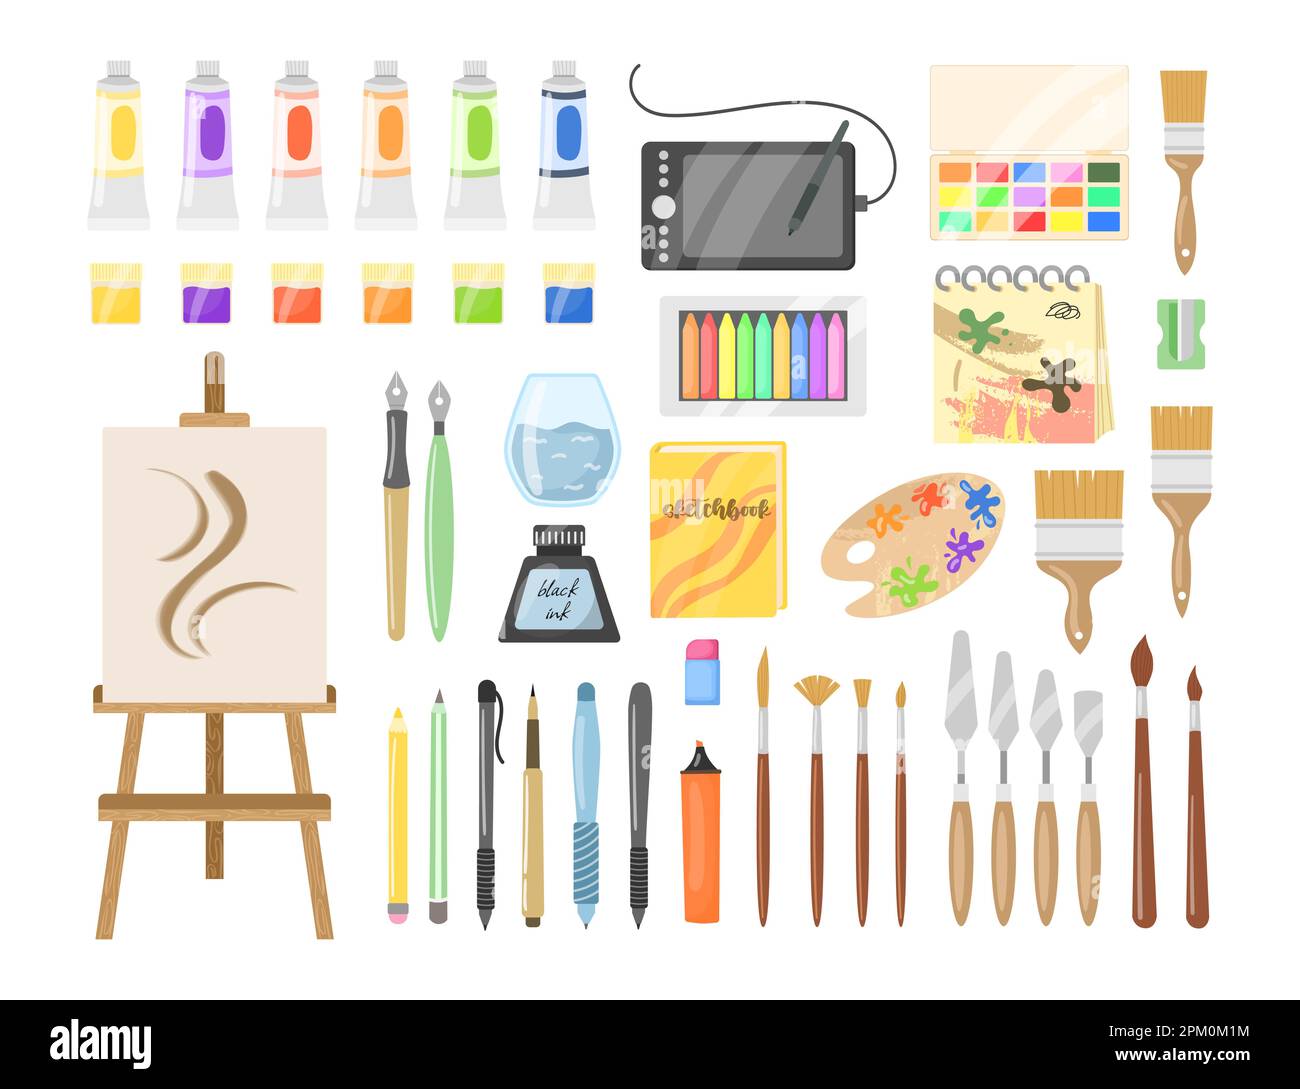 Art Supplies Stock Vector Illustration and Royalty Free Art Supplies Clipart